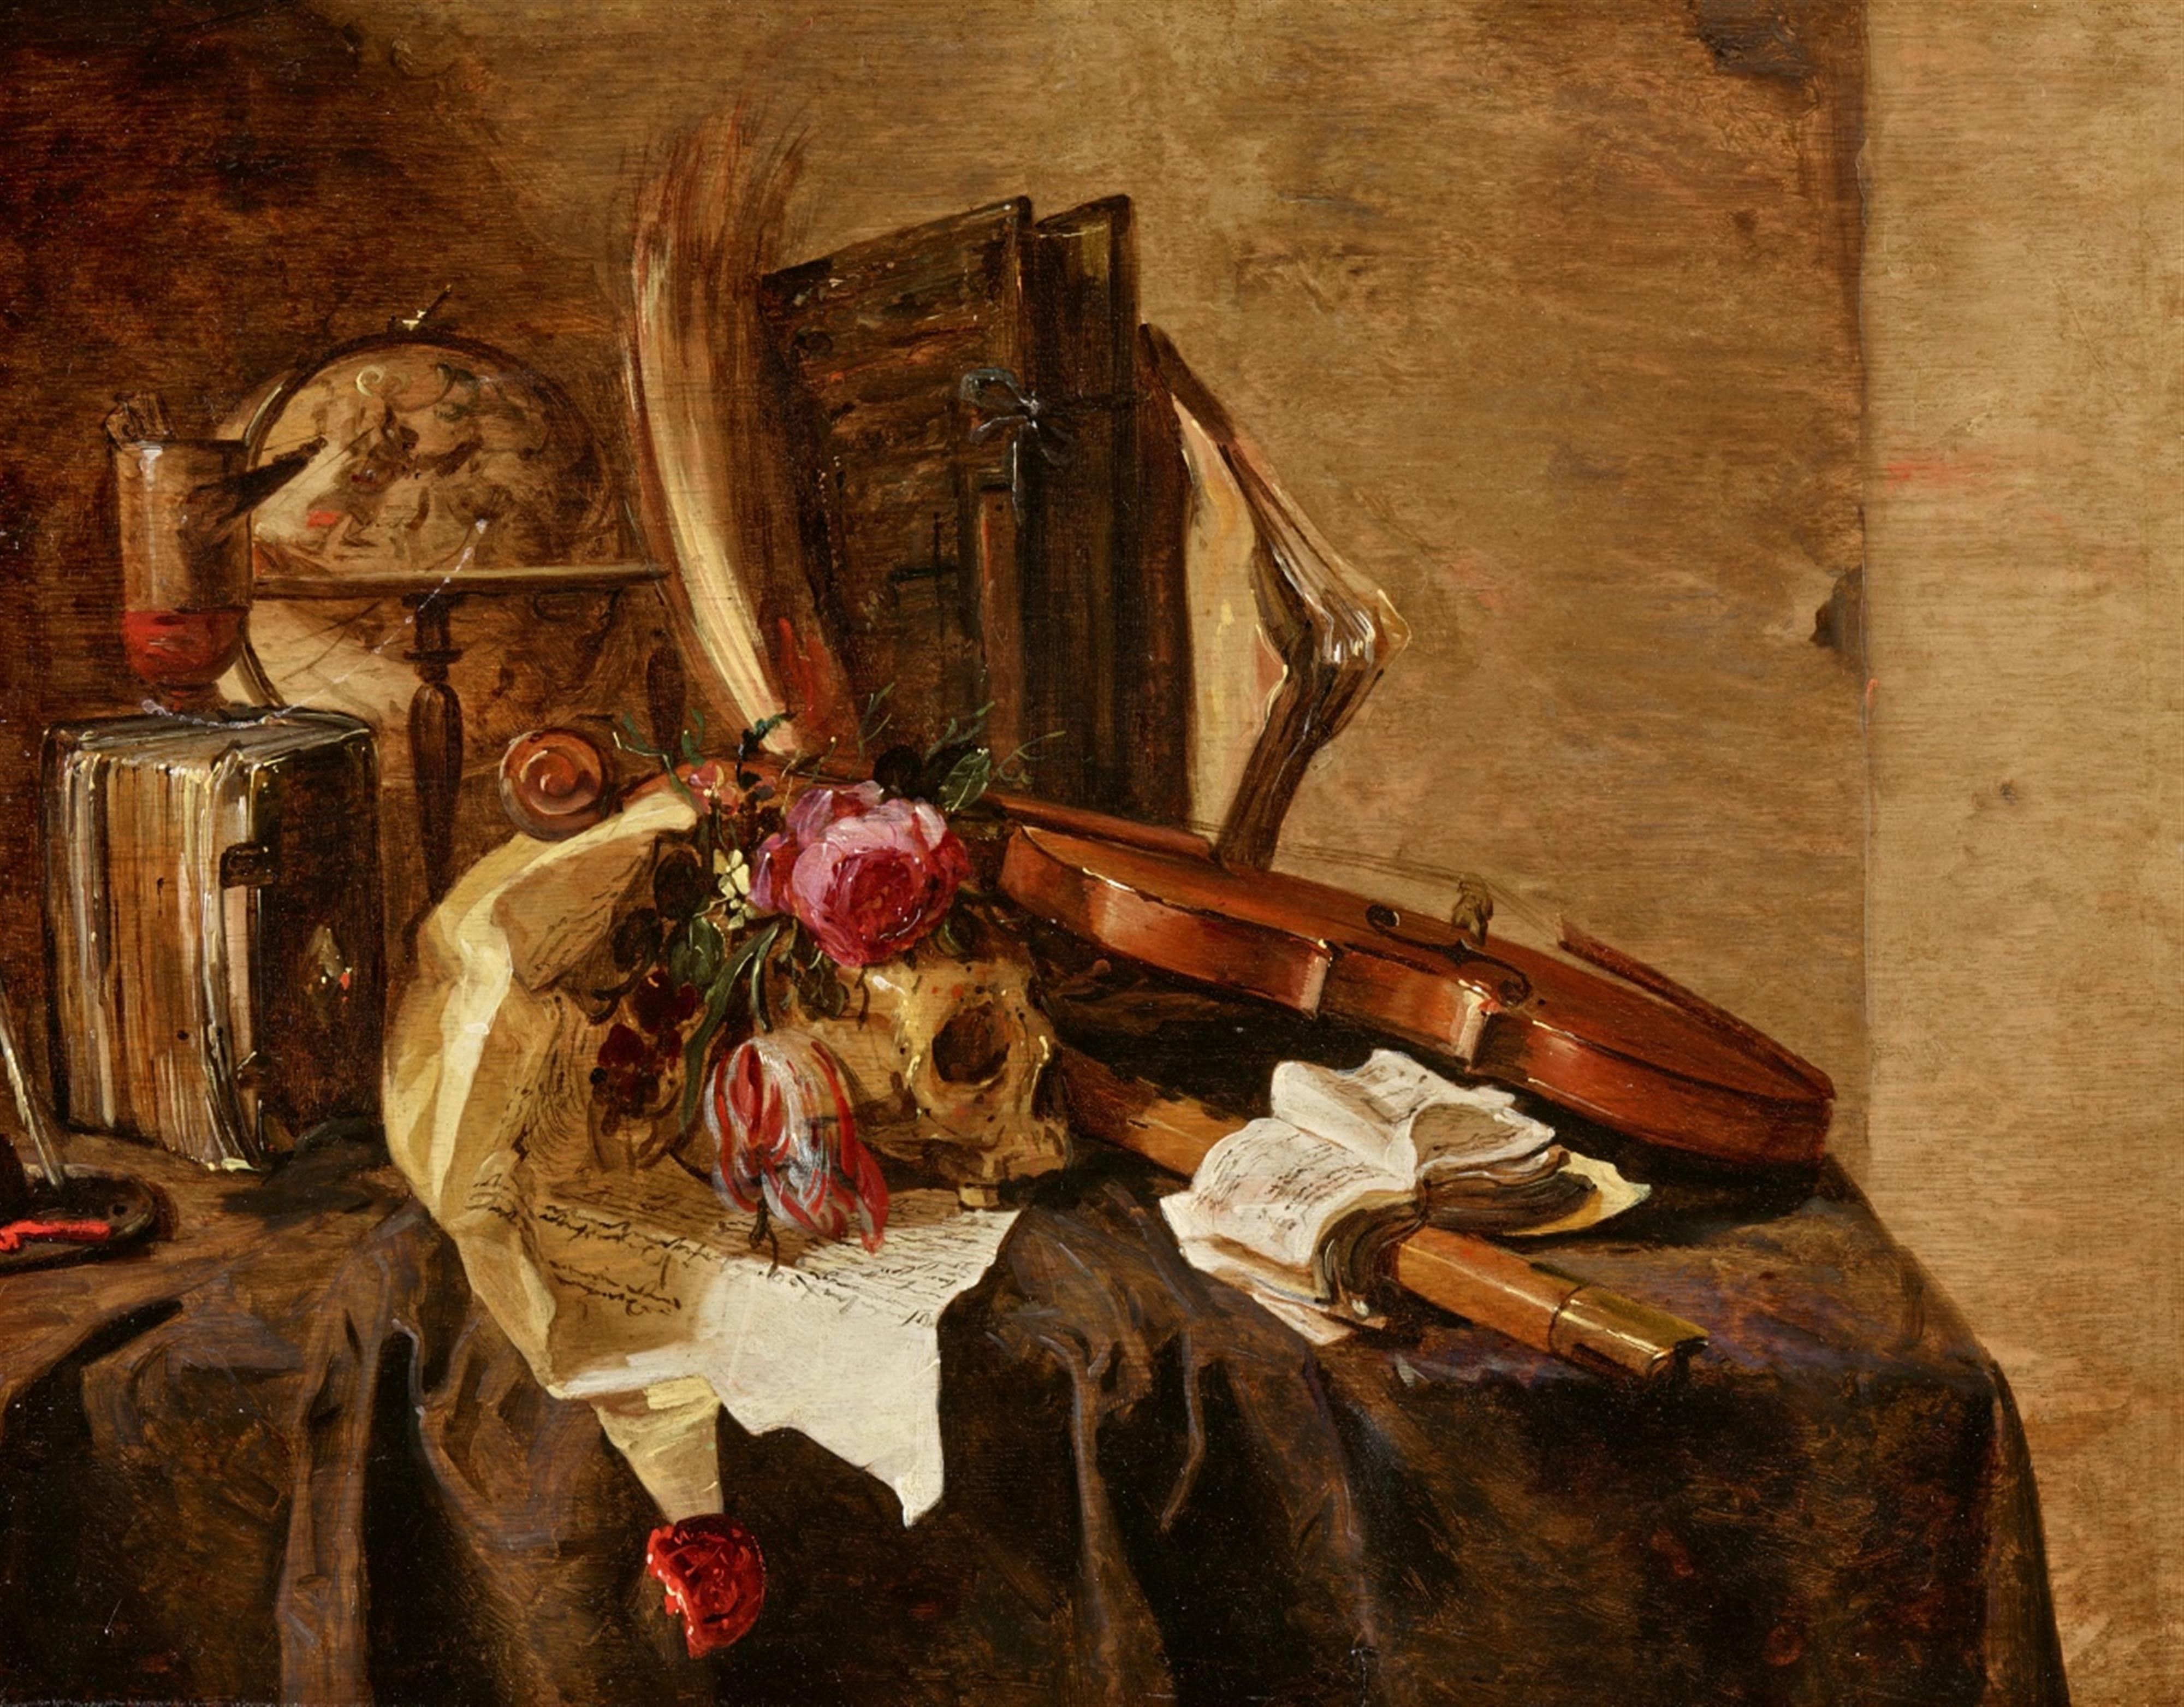 Jacques de Claeuw - Vanitas Still Life with Books, Flowers, a Skull, Globe and Violin - image-1